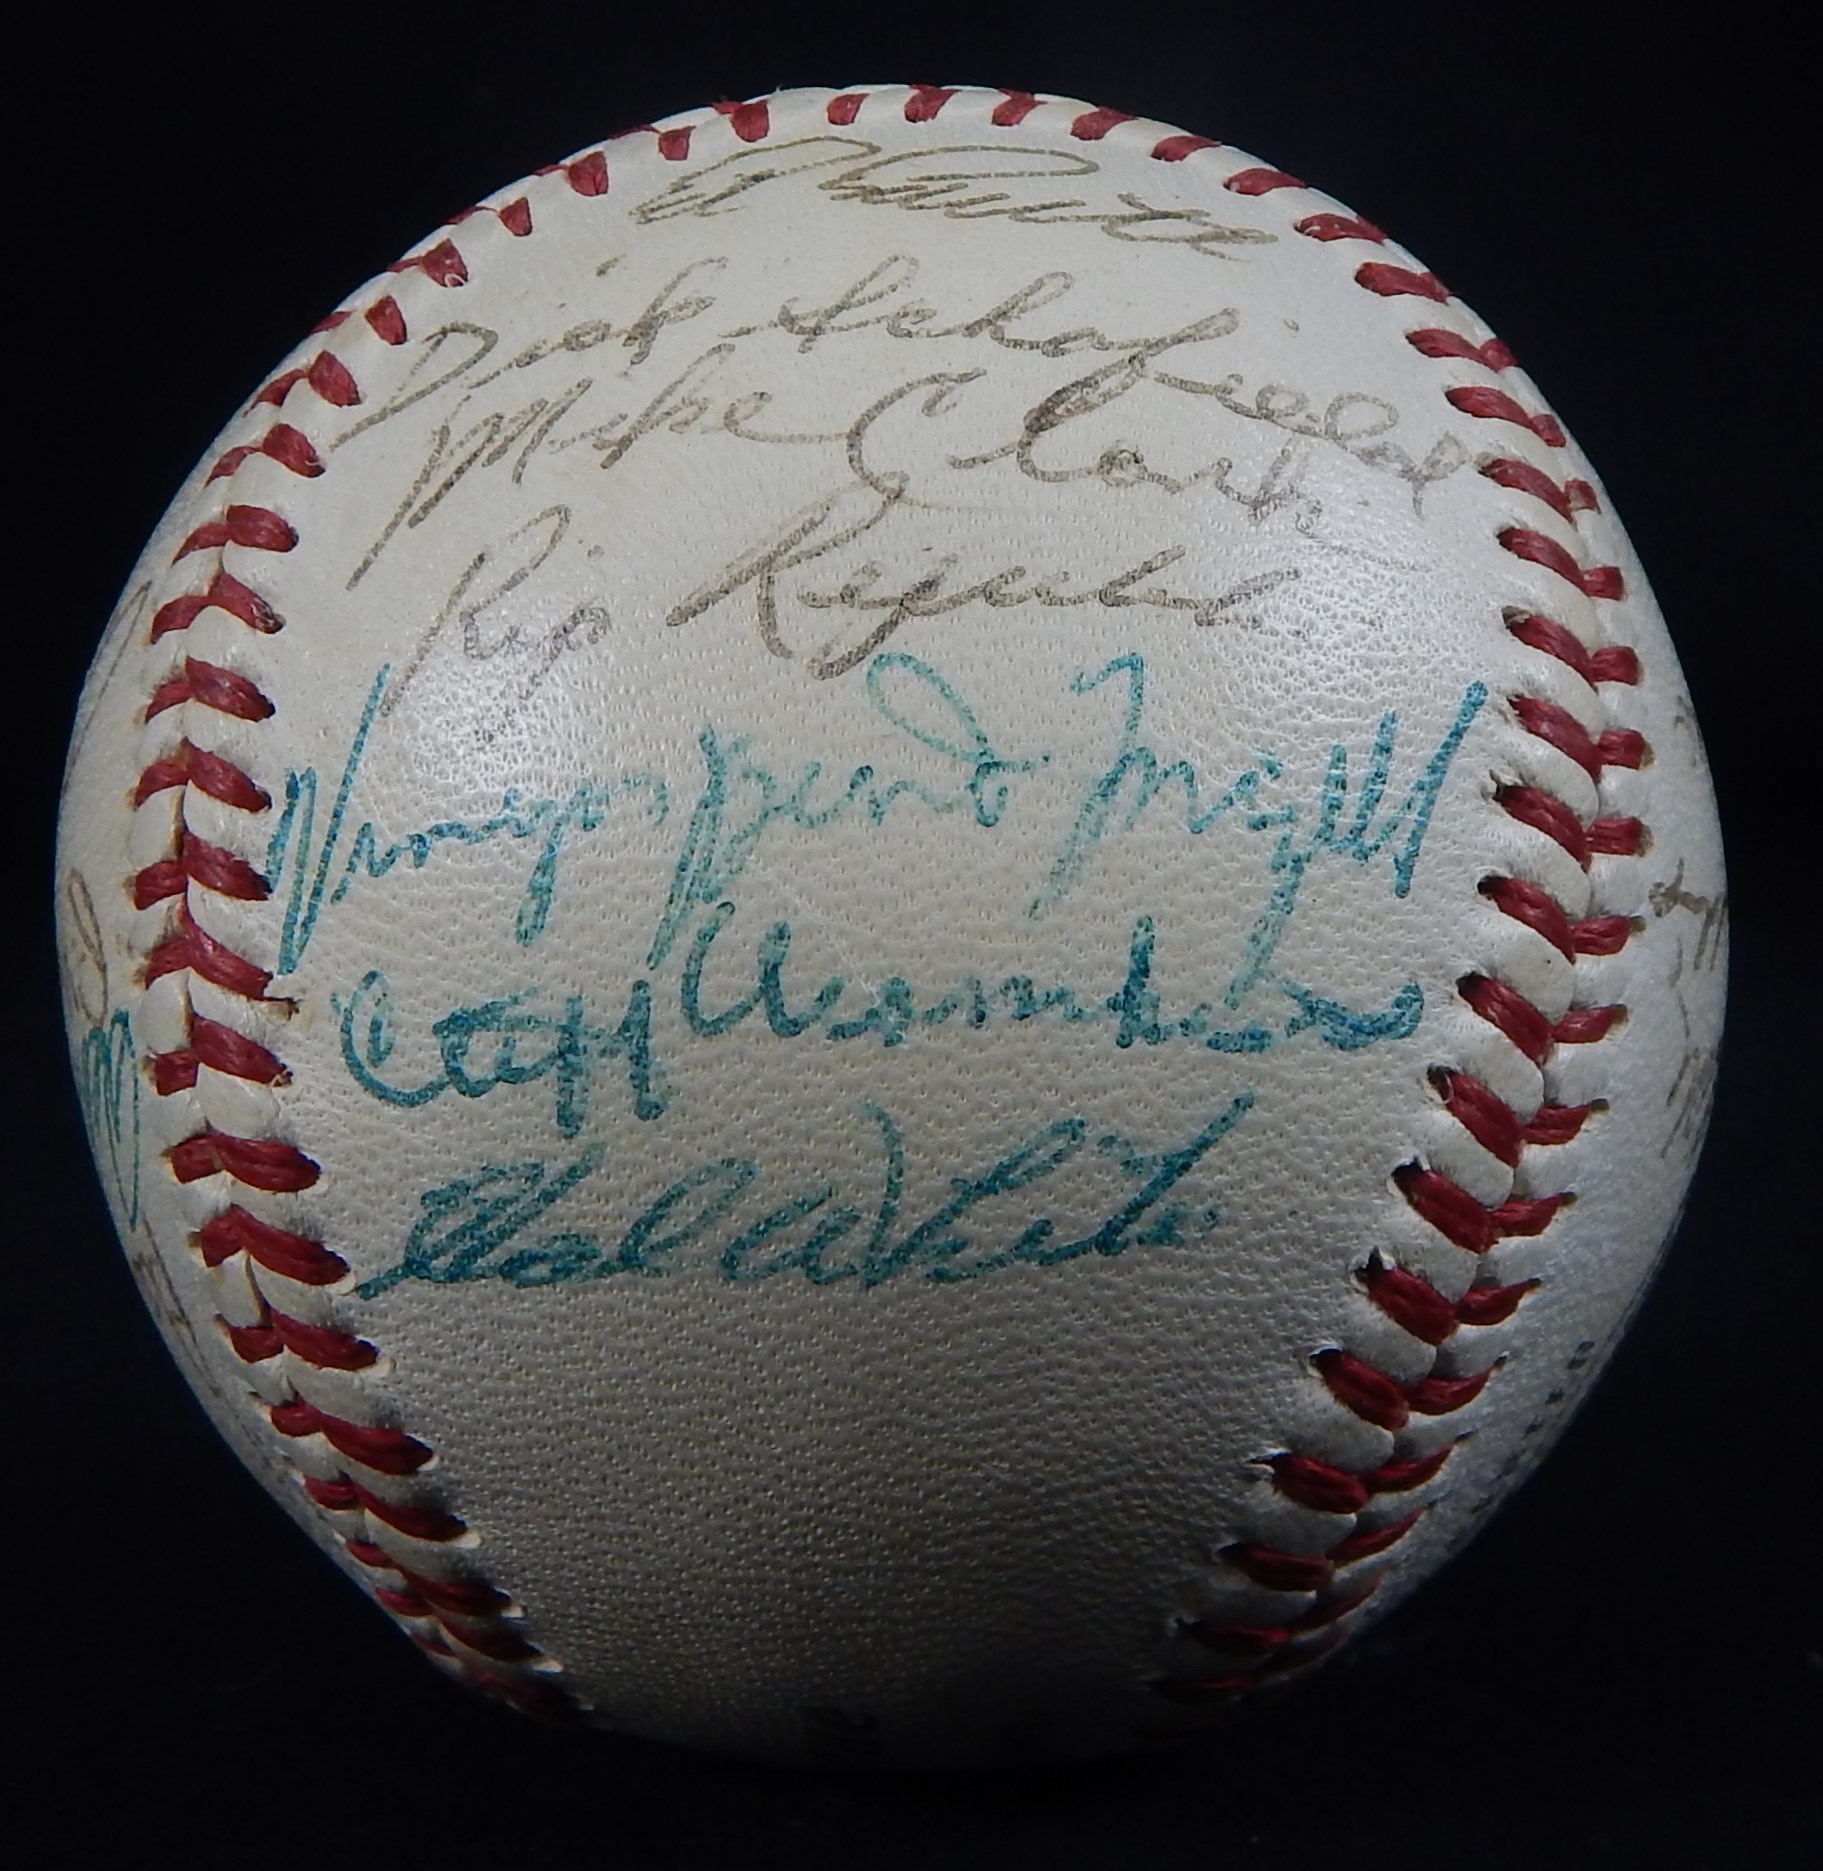 - 1953 St. Louis Cardinals Team Signed Baseball with Musial, Slaughter and Schoendienst